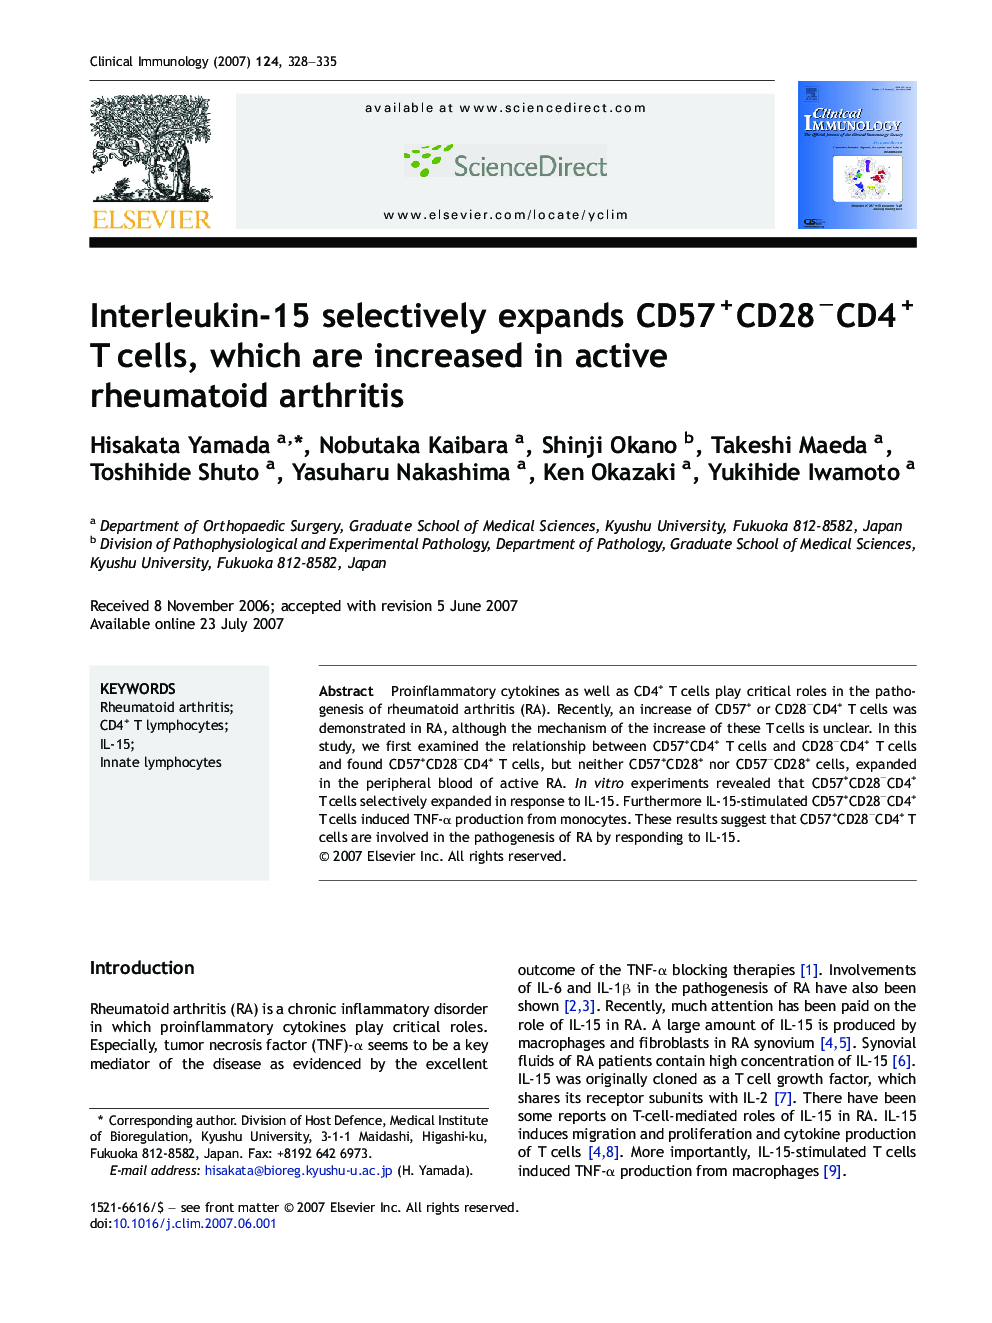 Interleukin-15 selectively expands CD57+CD28−CD4+ T cells, which are increased in active rheumatoid arthritis